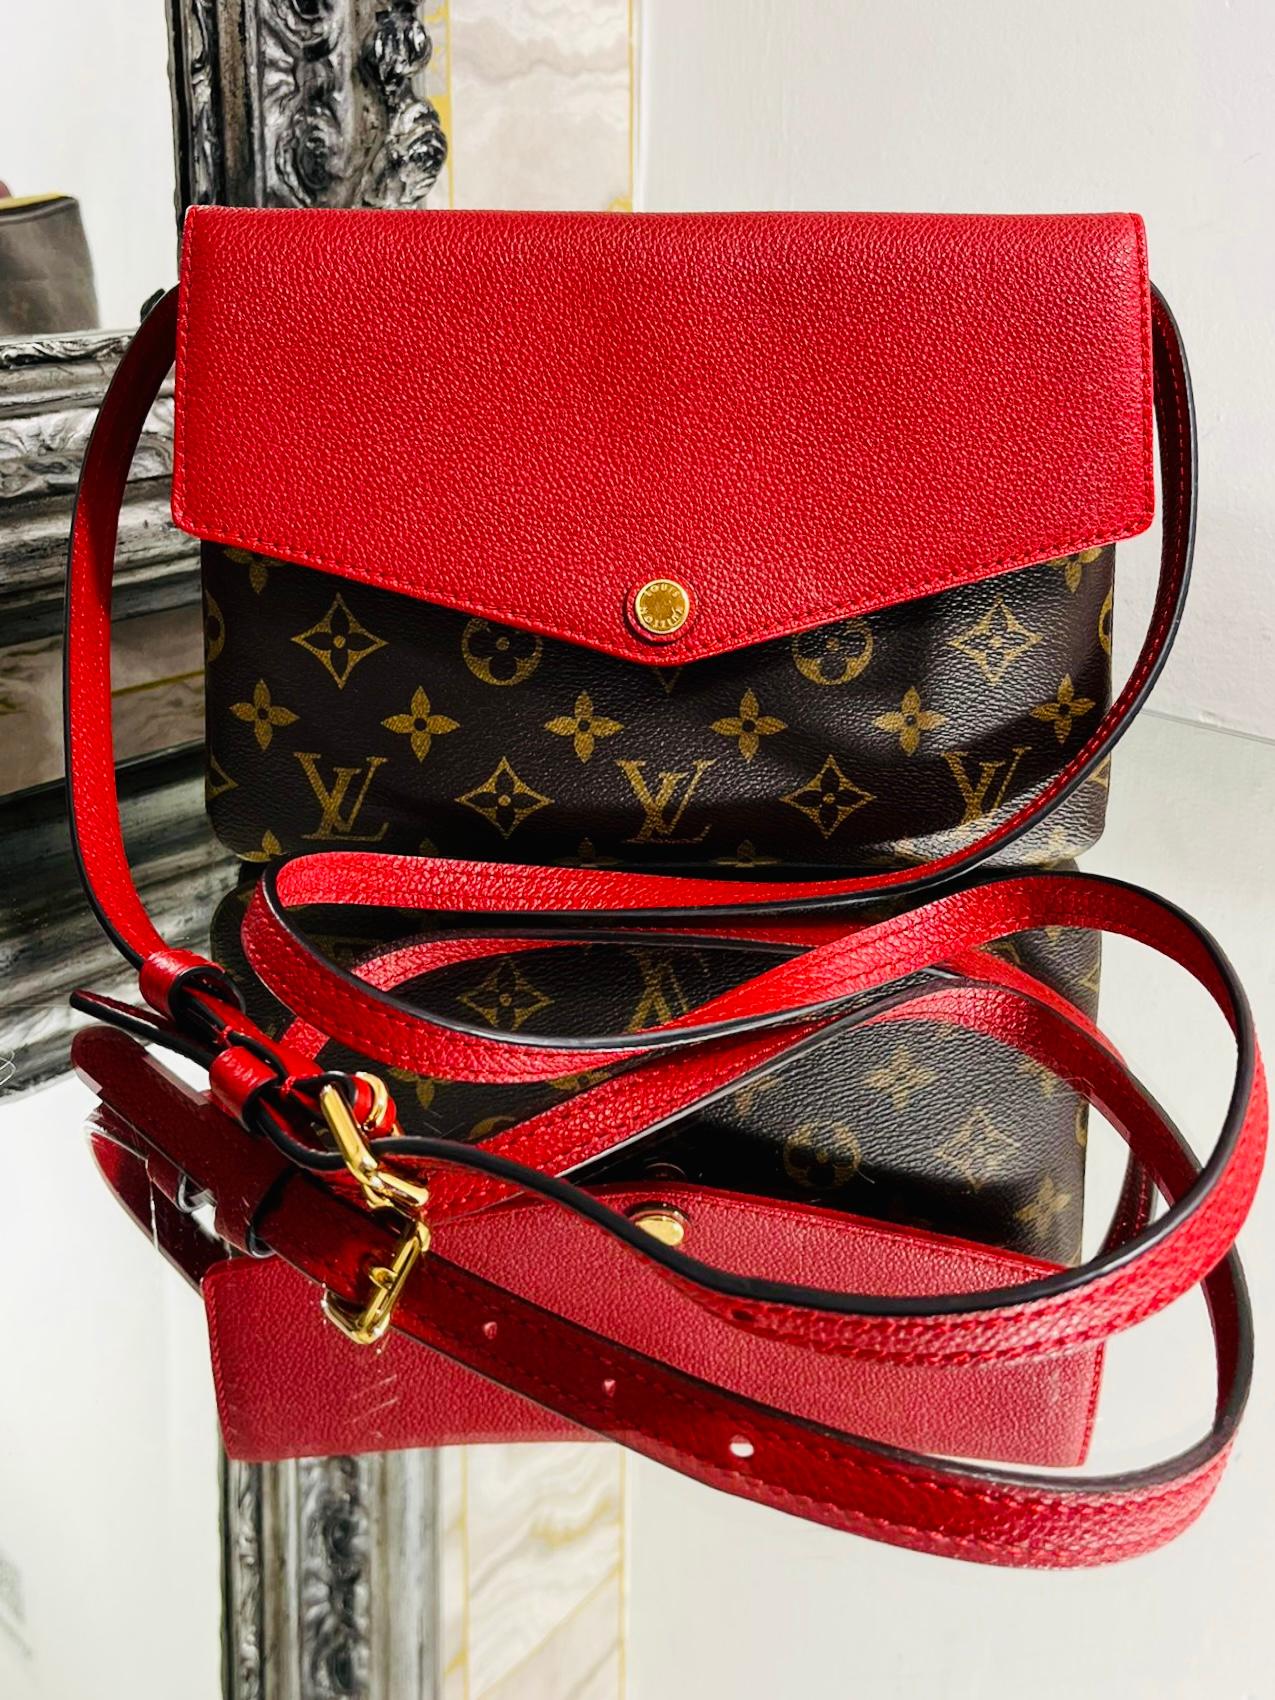 Louis Vuitton Monogram Twice Pochette Bag

'LV' logo monogram coated canvas with a leather cherry red flap closure

and matching shoulder/crossbody strap. Double compartments.

Size - Height 17cm, Width 23cm, Depth 6cm

Condition - Very